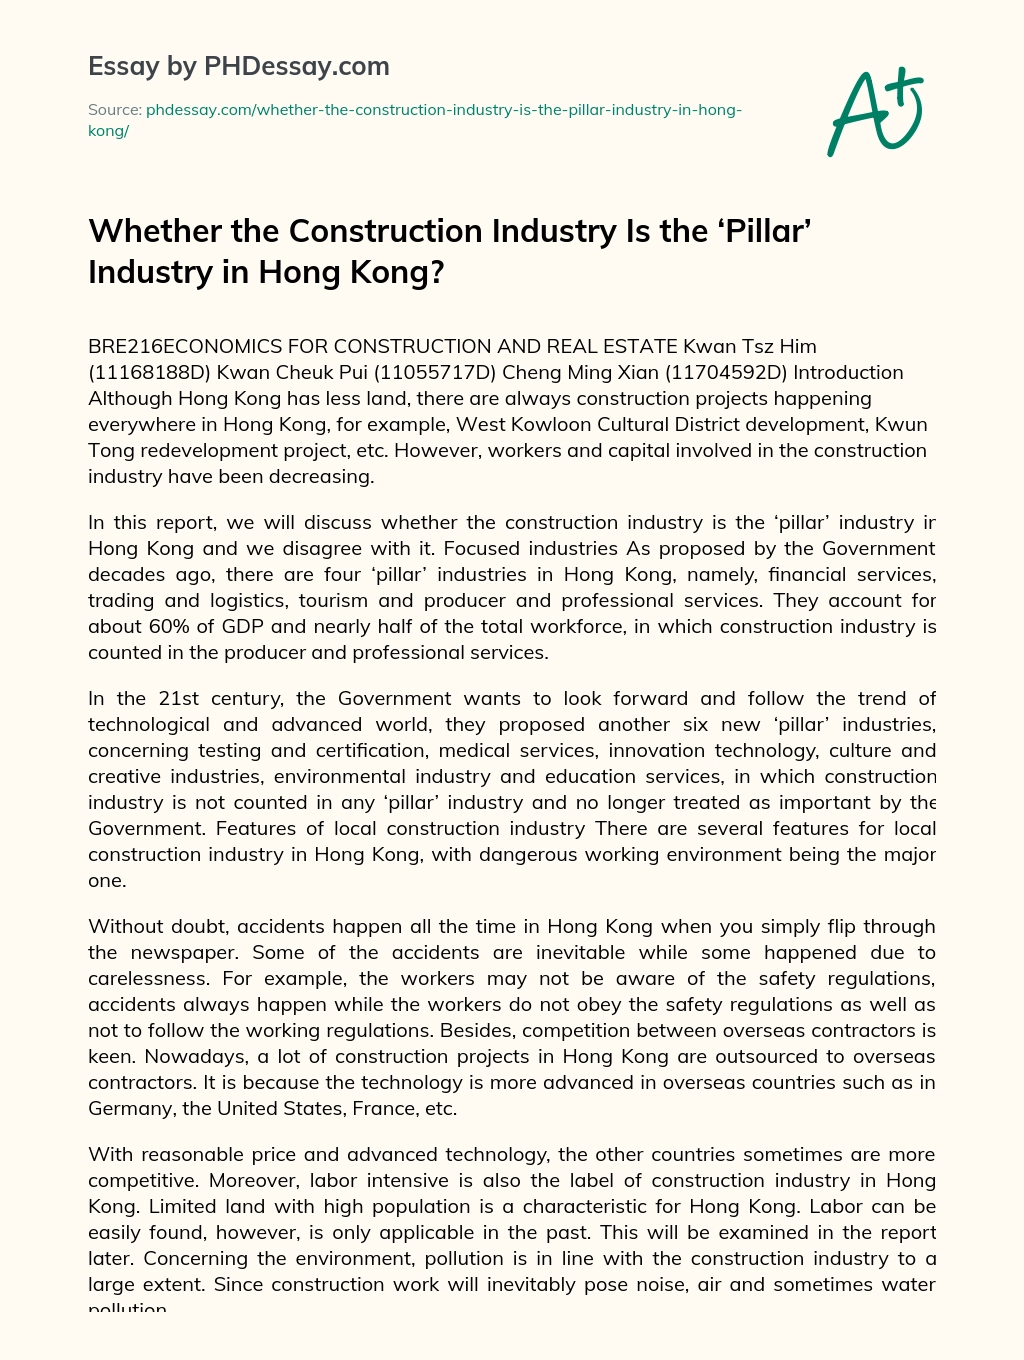 Whether the Construction Industry Is the ‘Pillar’ Industry in Hong Kong? essay